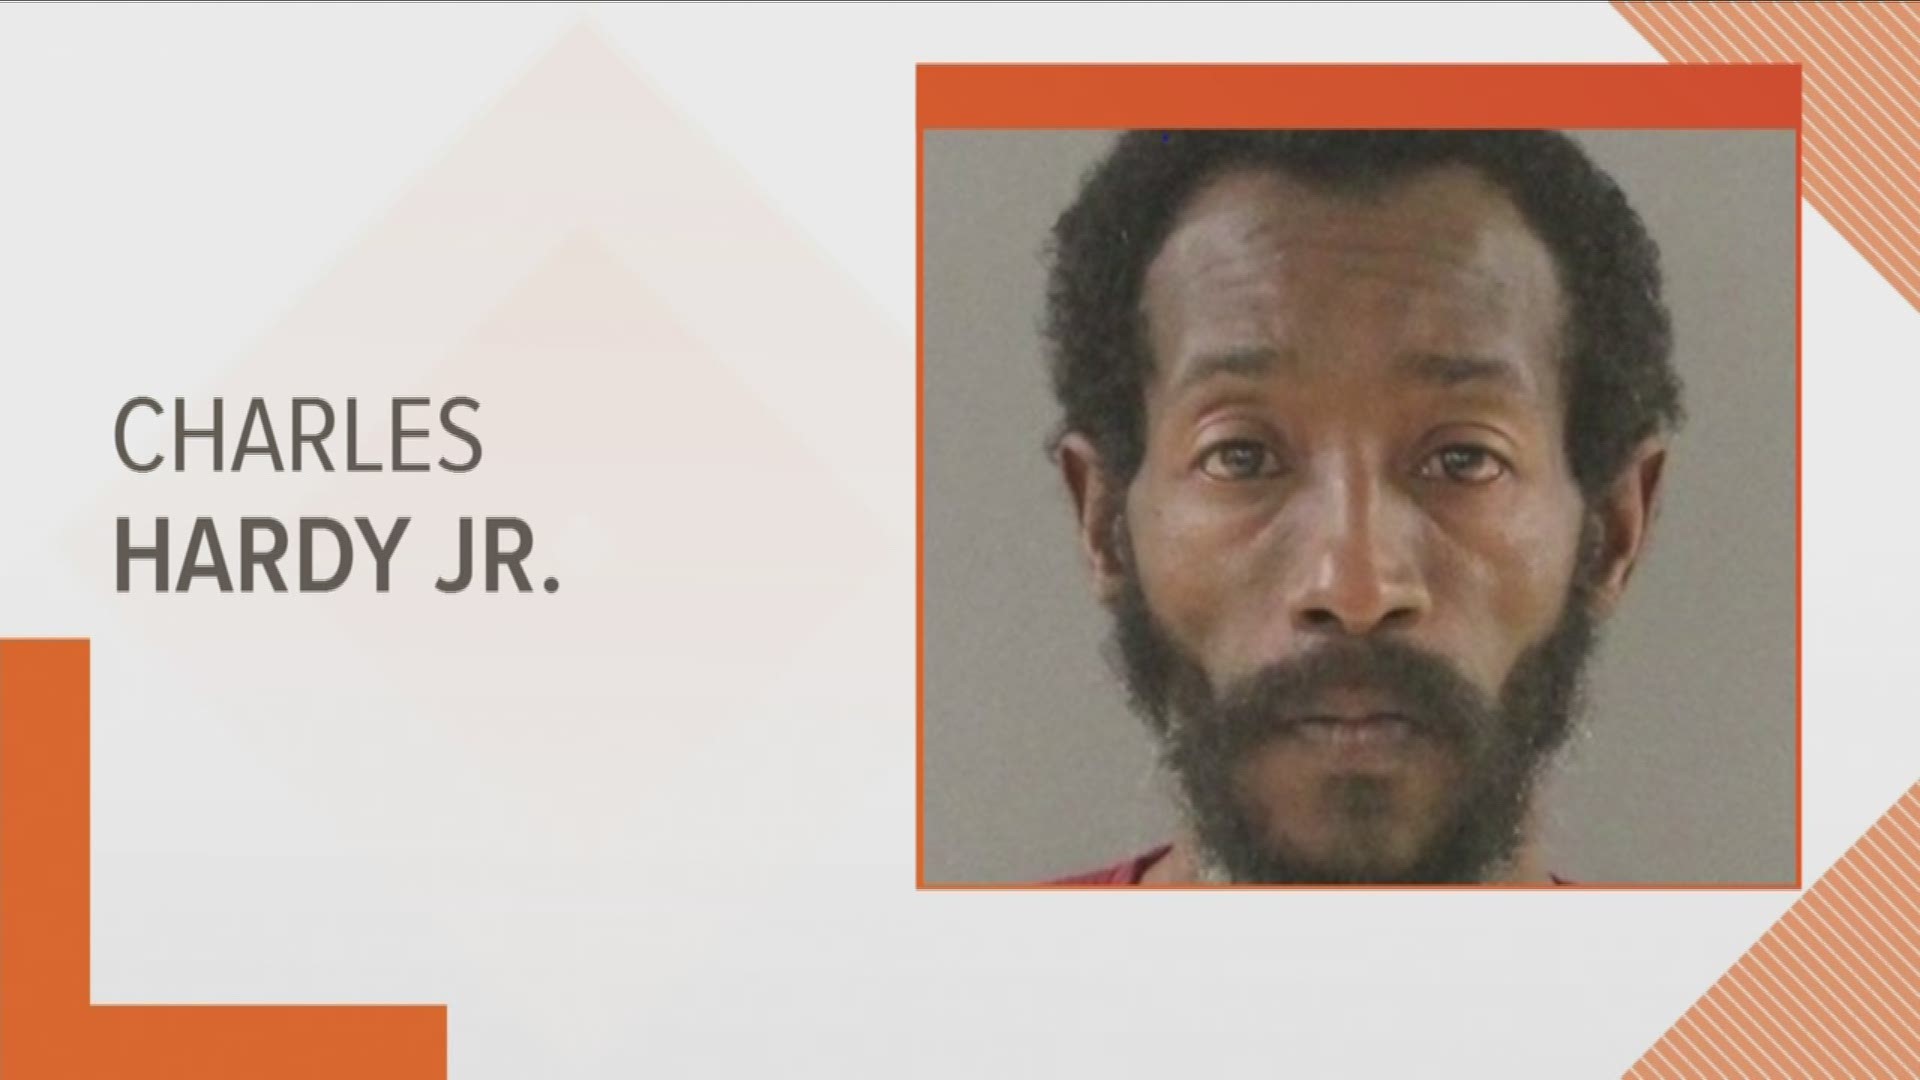 A man charged with murder in a Knoxville apartment complex is now on trial in Knox County.